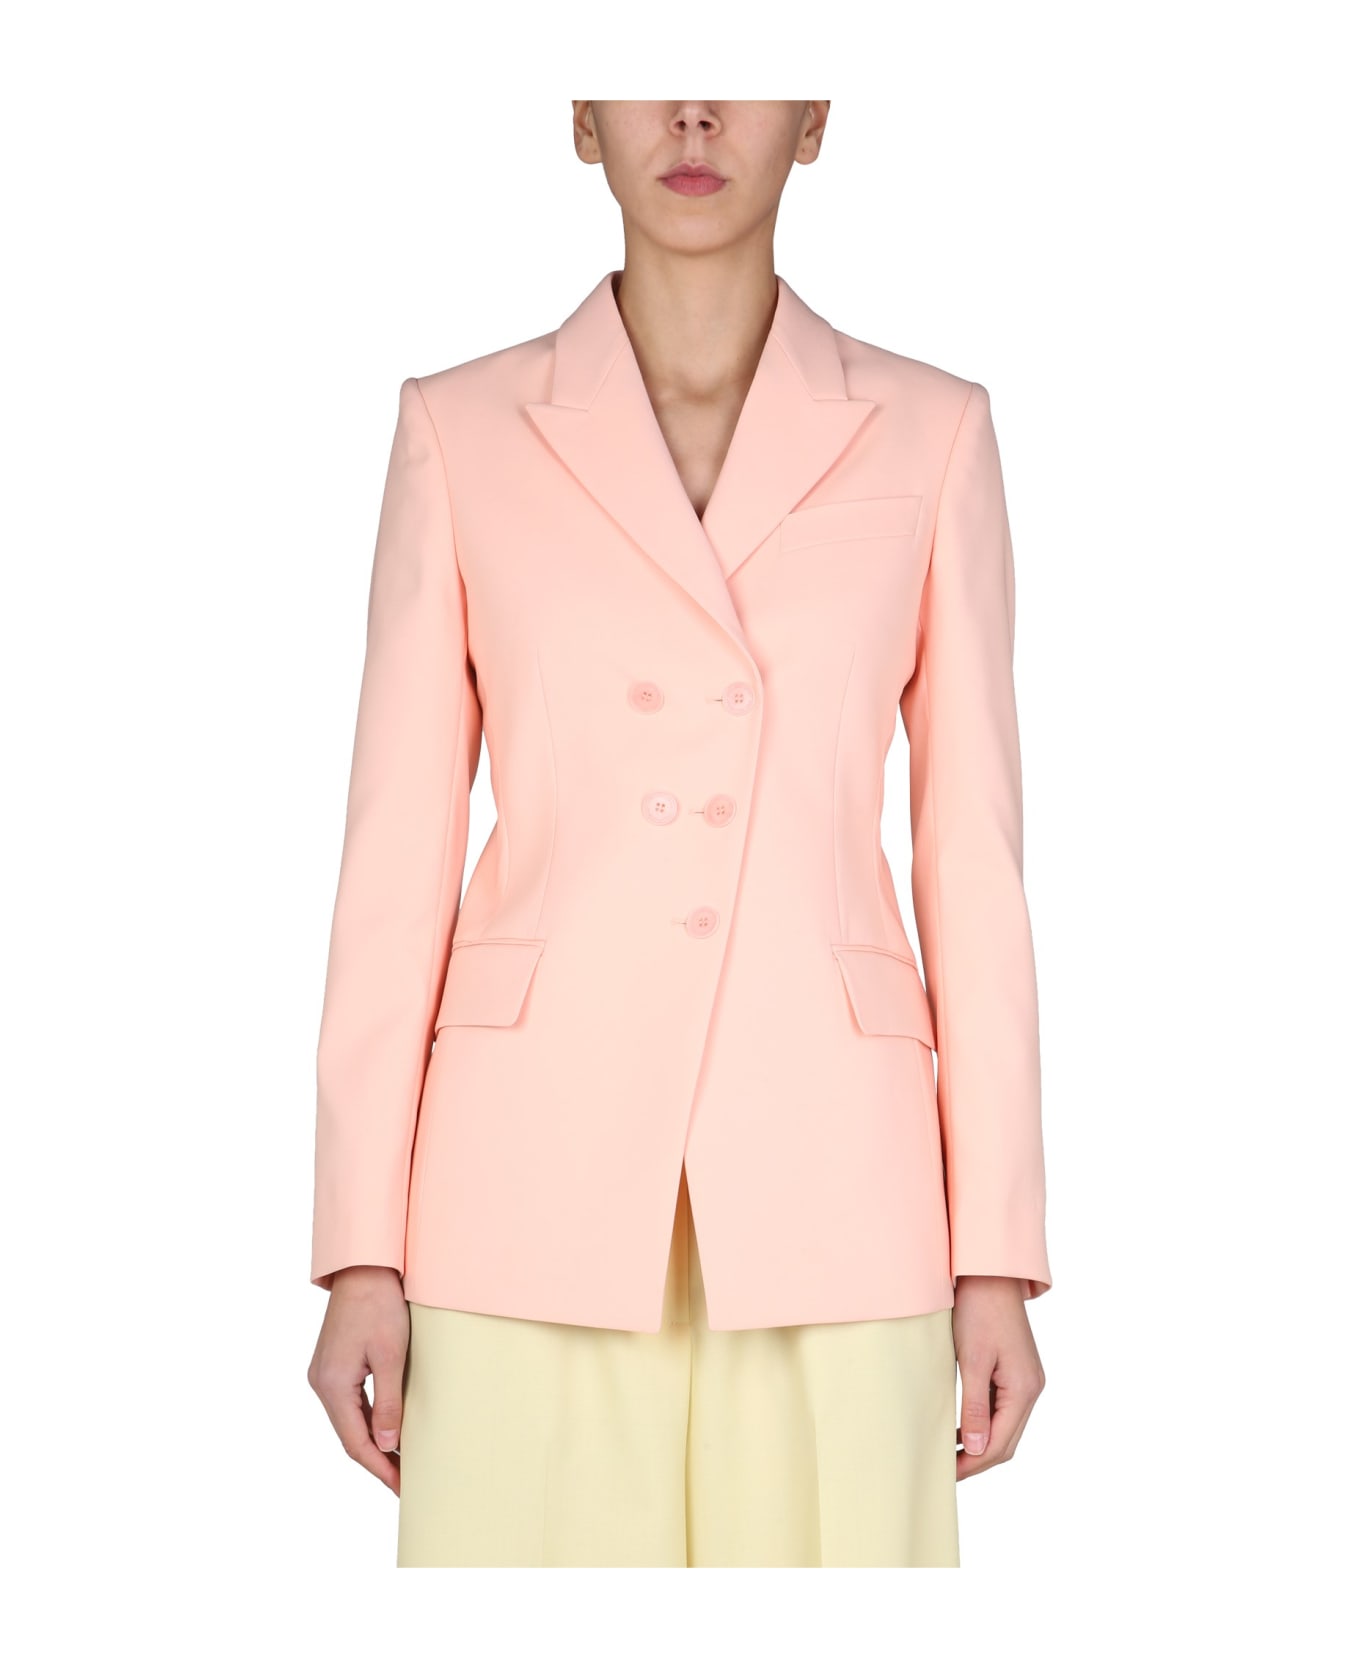 Stella McCartney Double-breasted Jacket - PINK ブレザー